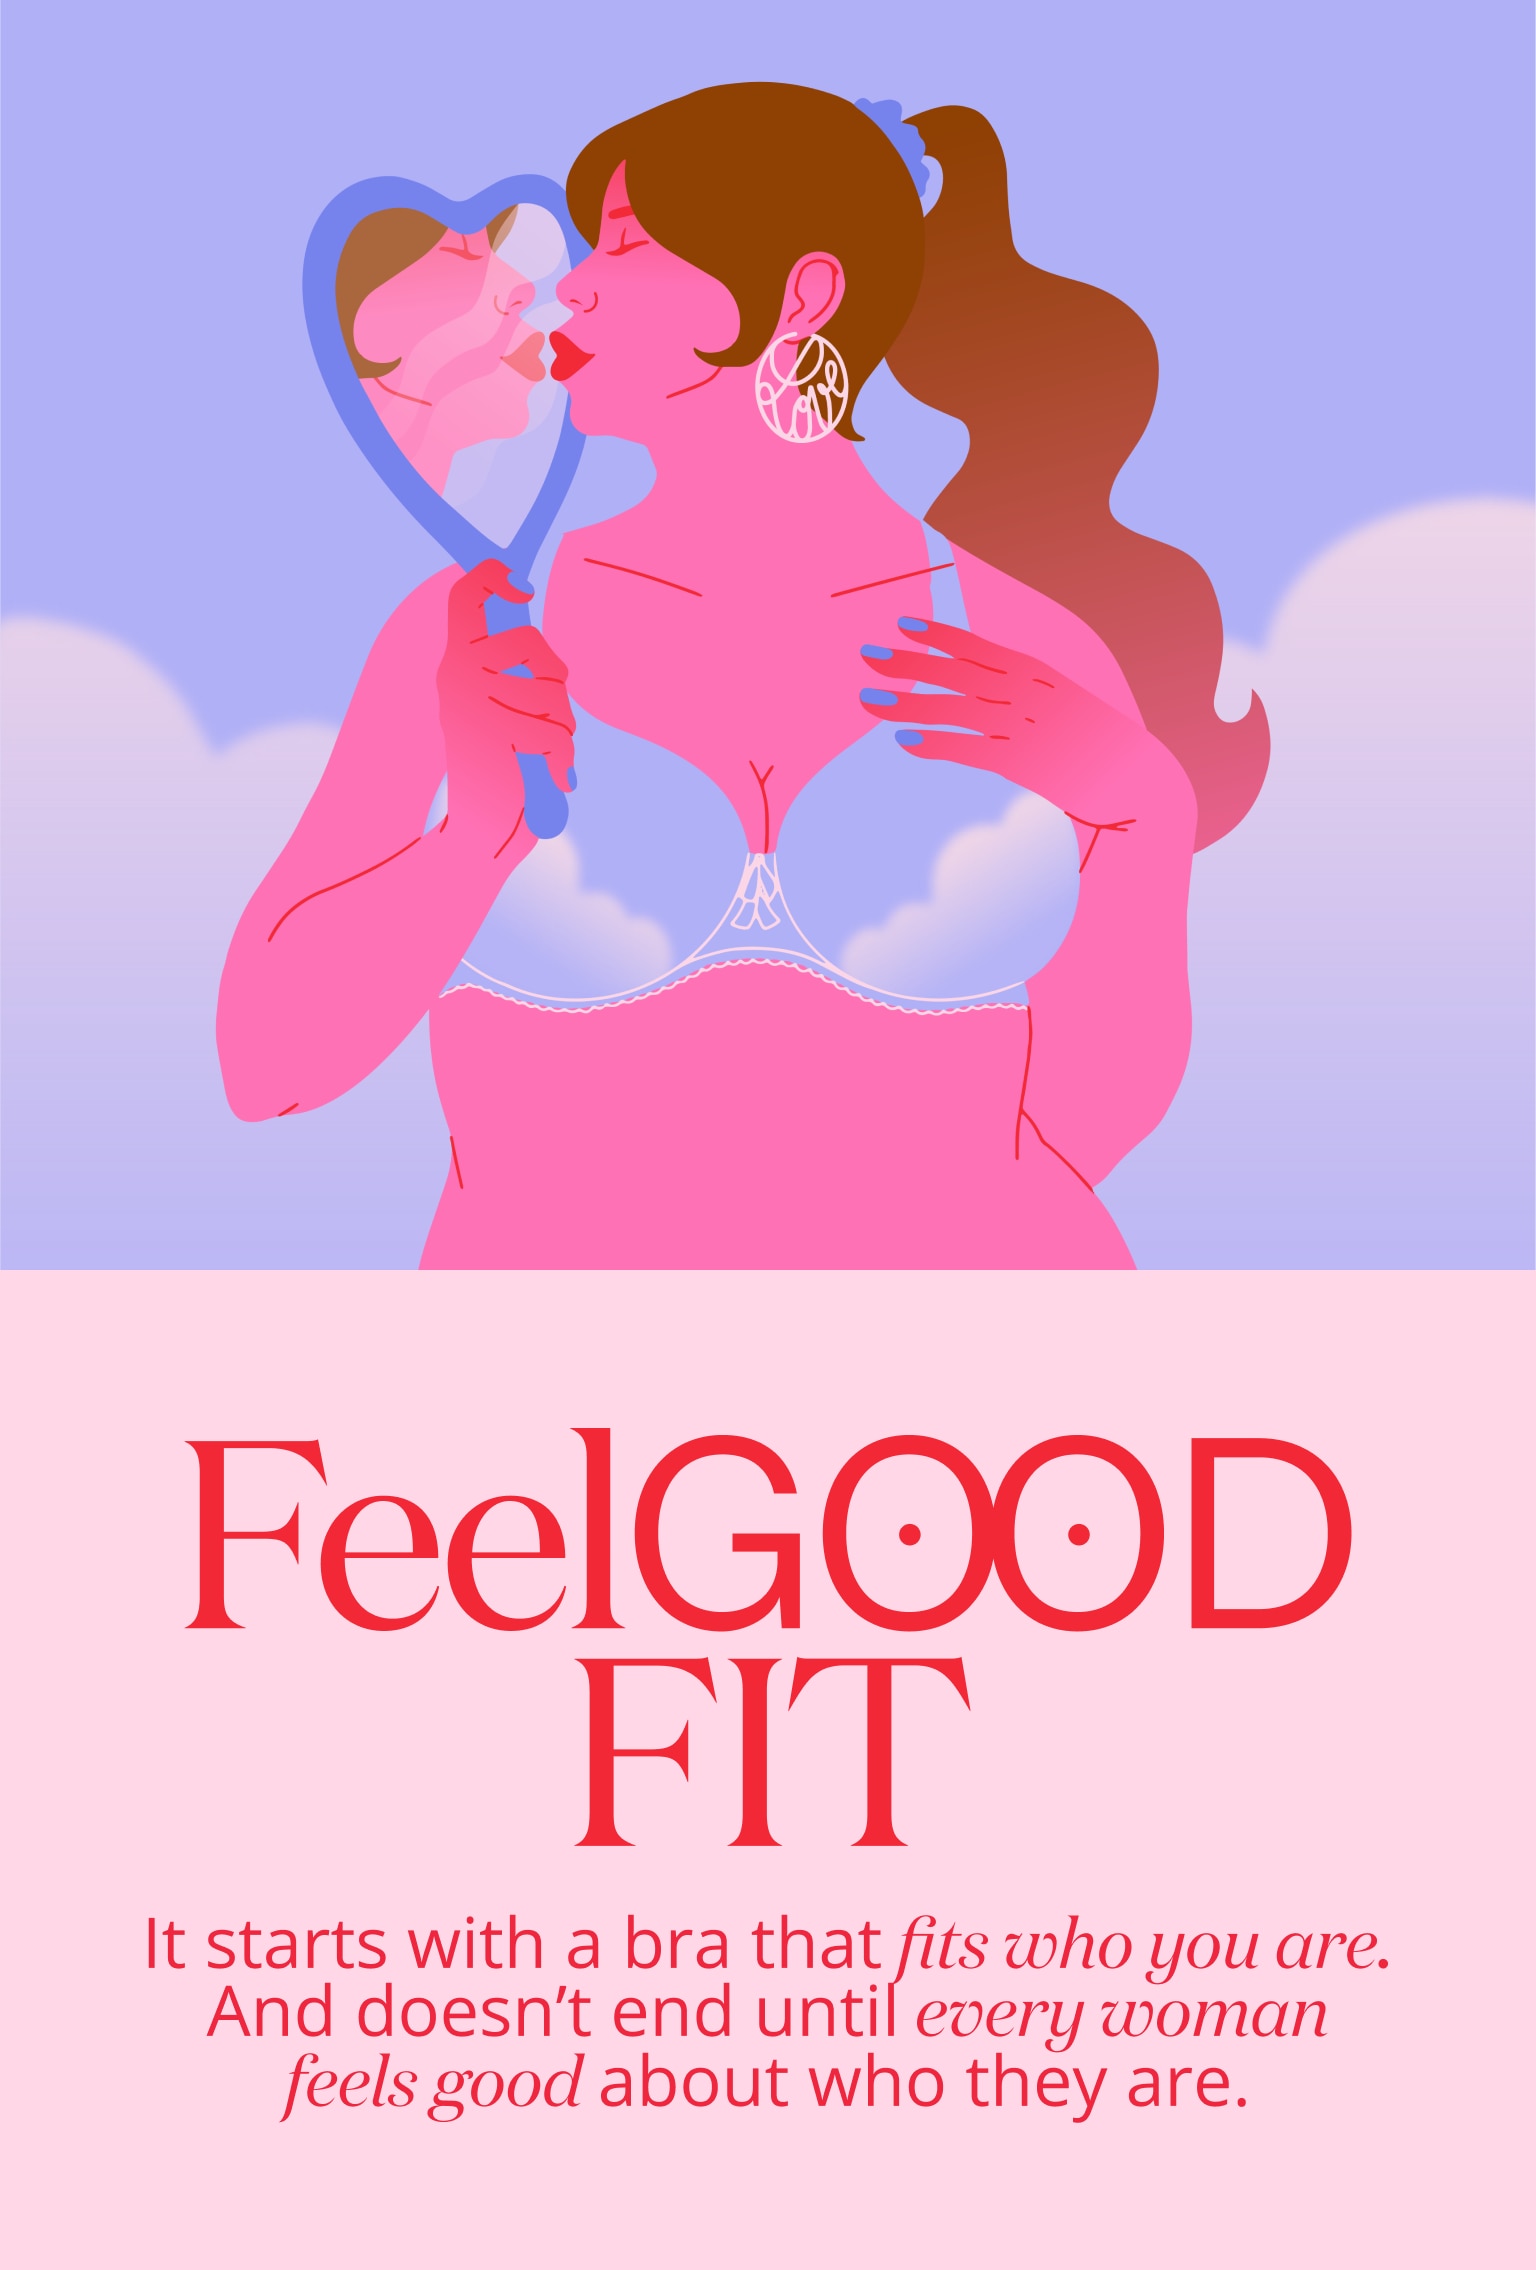 Feel Good Fit. It starts with a bra that fits who you are. And doesn't end until every woman feels good about who they are.